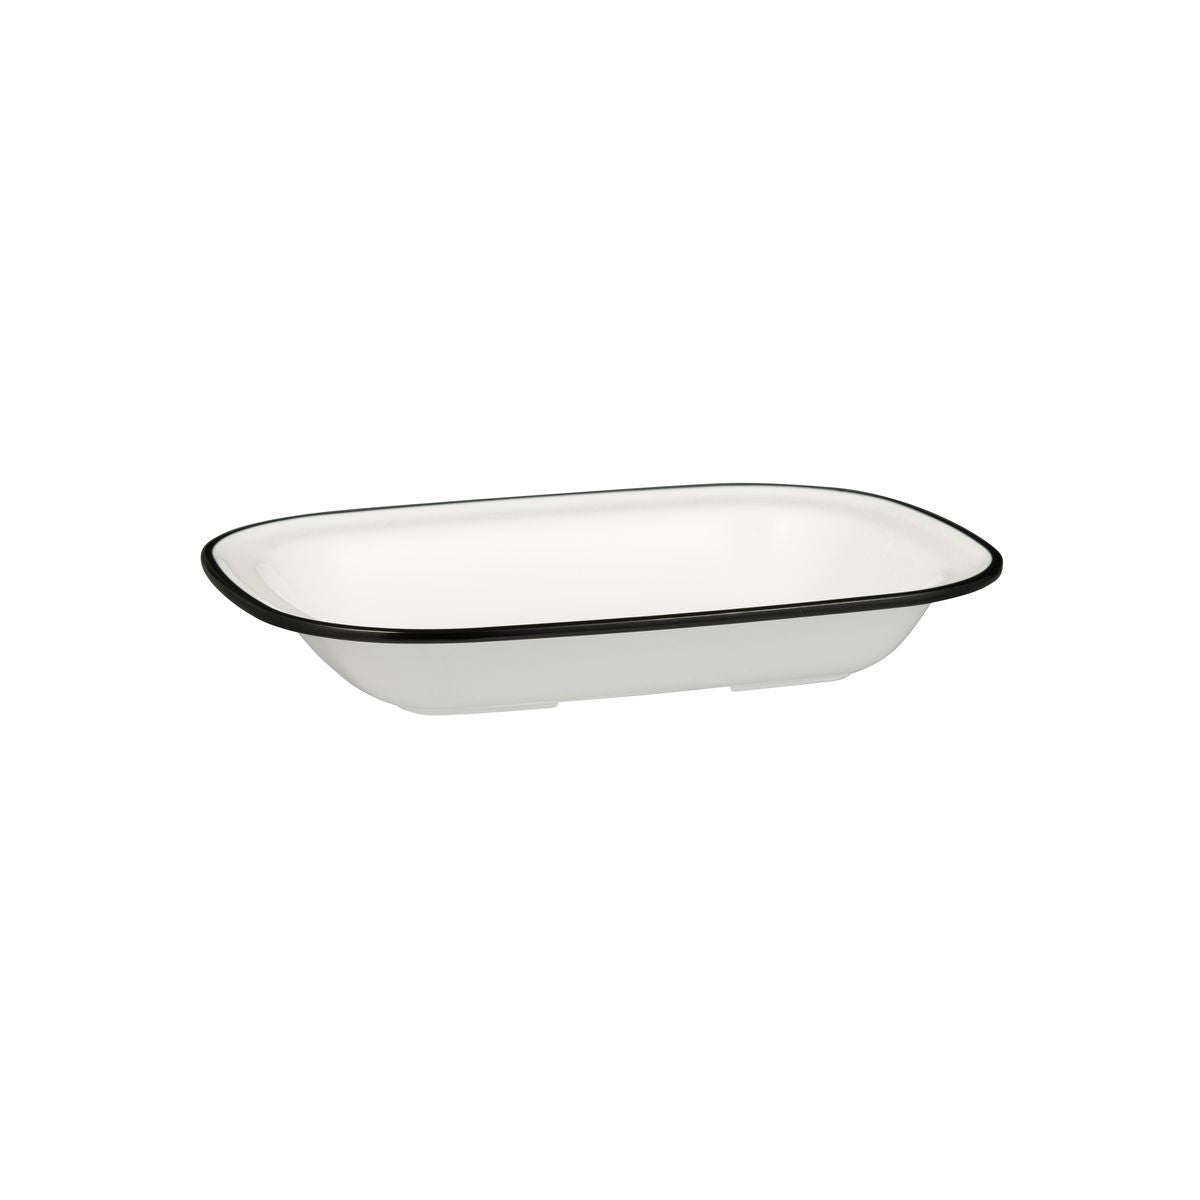 Rectangular Dish, 270 x 200 x 42mm, Melamine - White & Black from Ryner Melamine. Sold in boxes of 12. Hospitality quality at wholesale price with The Flying Fork! 